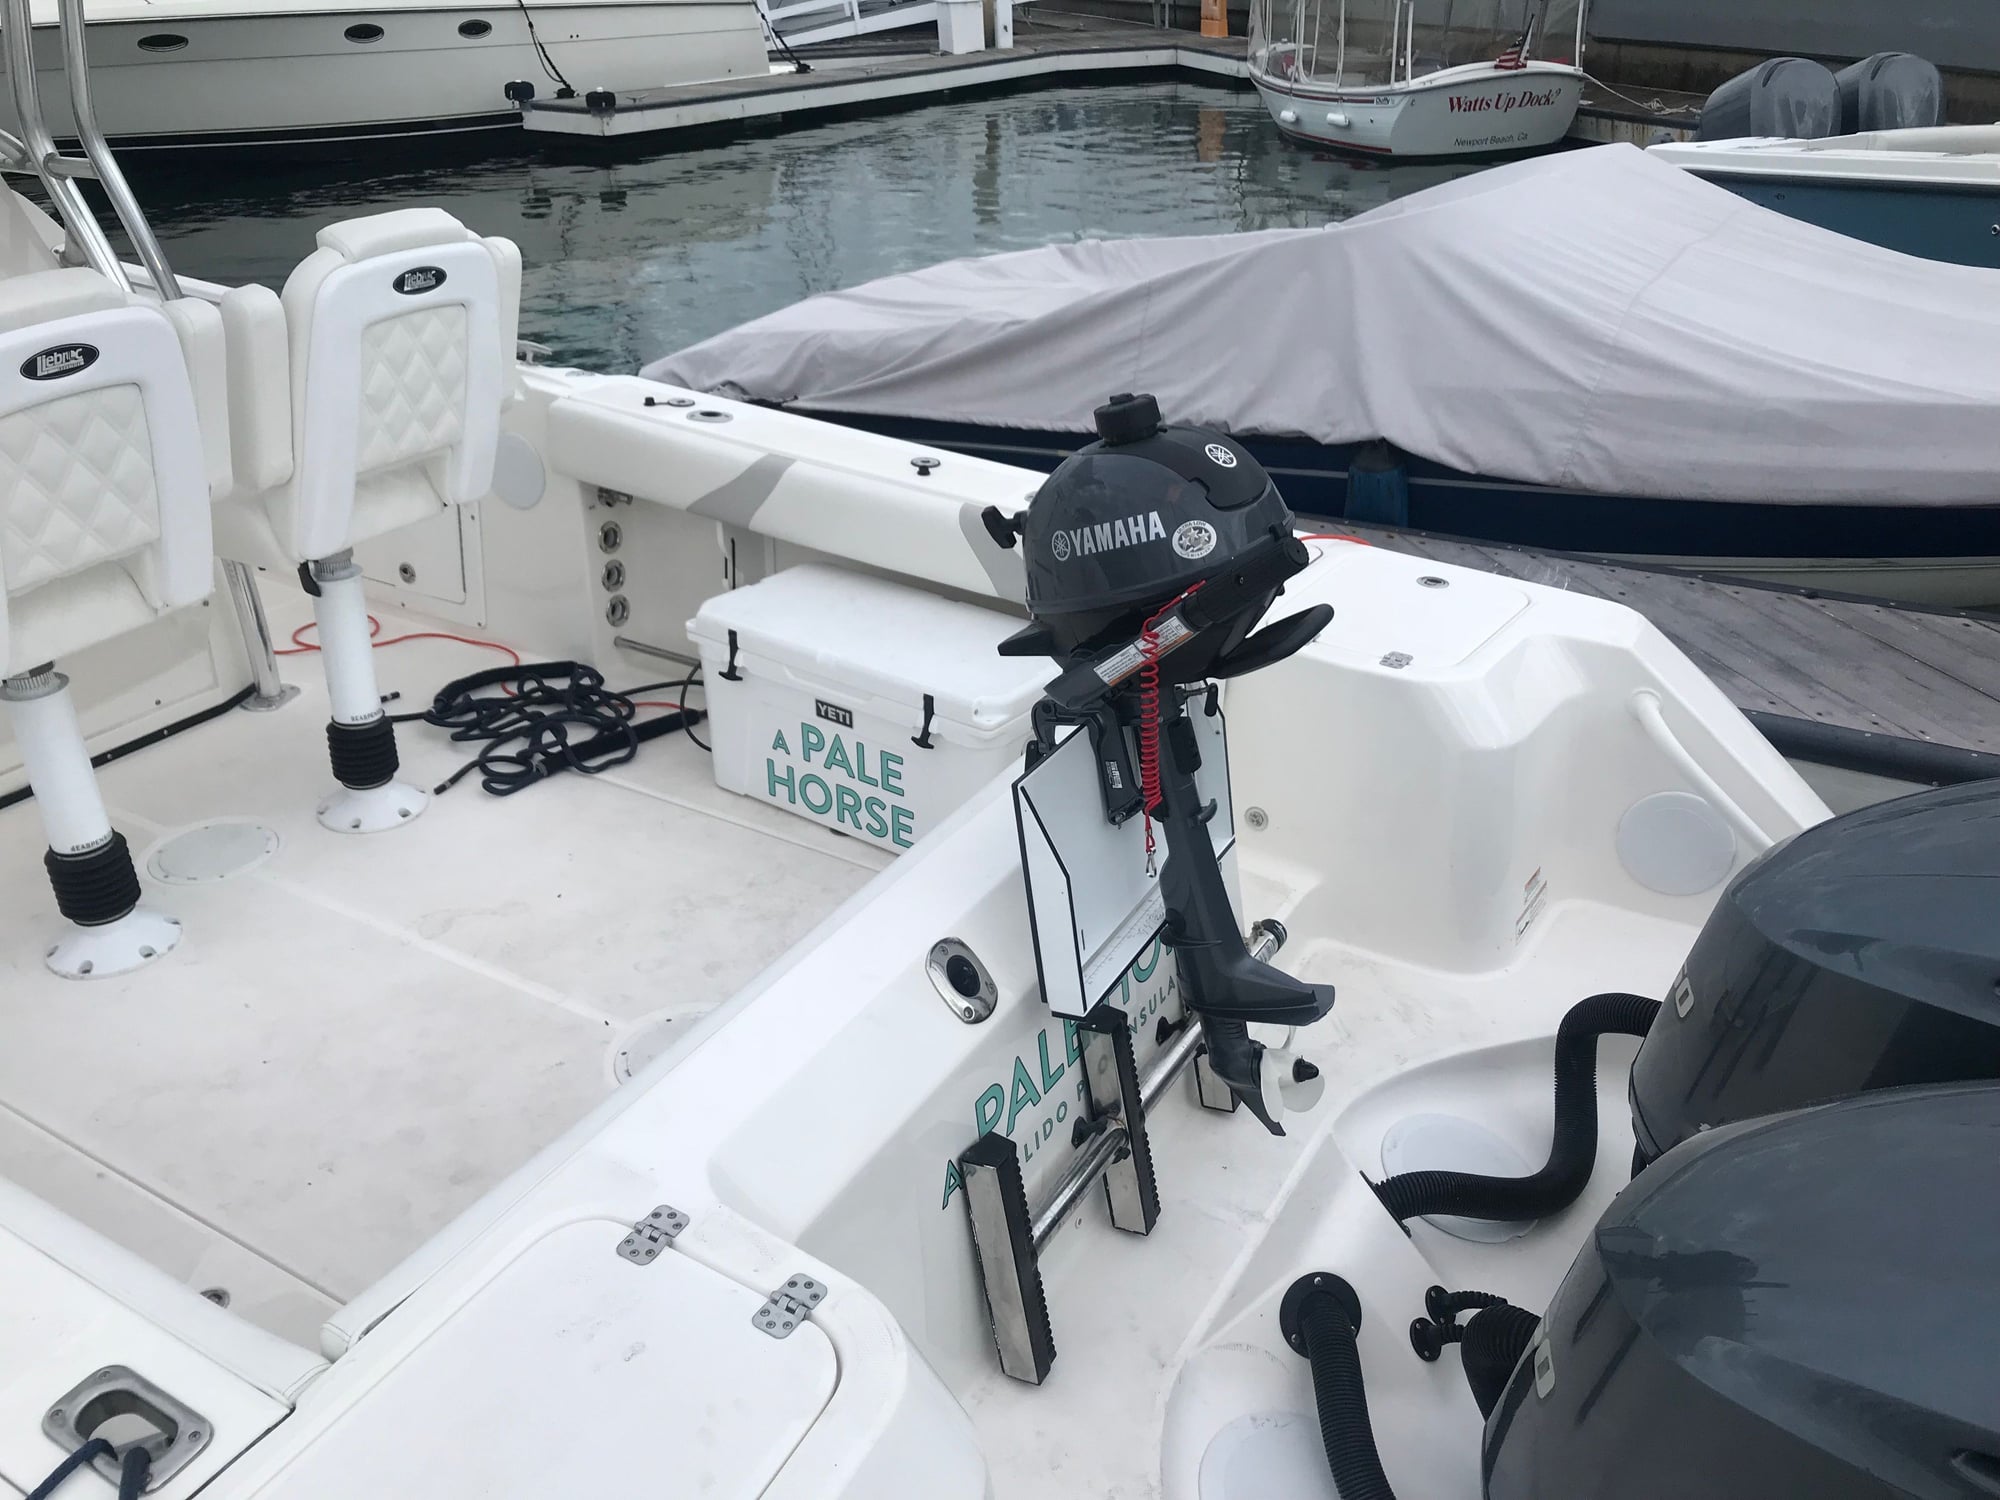 Standard Rod Holder Stress - The Hull Truth - Boating and Fishing Forum